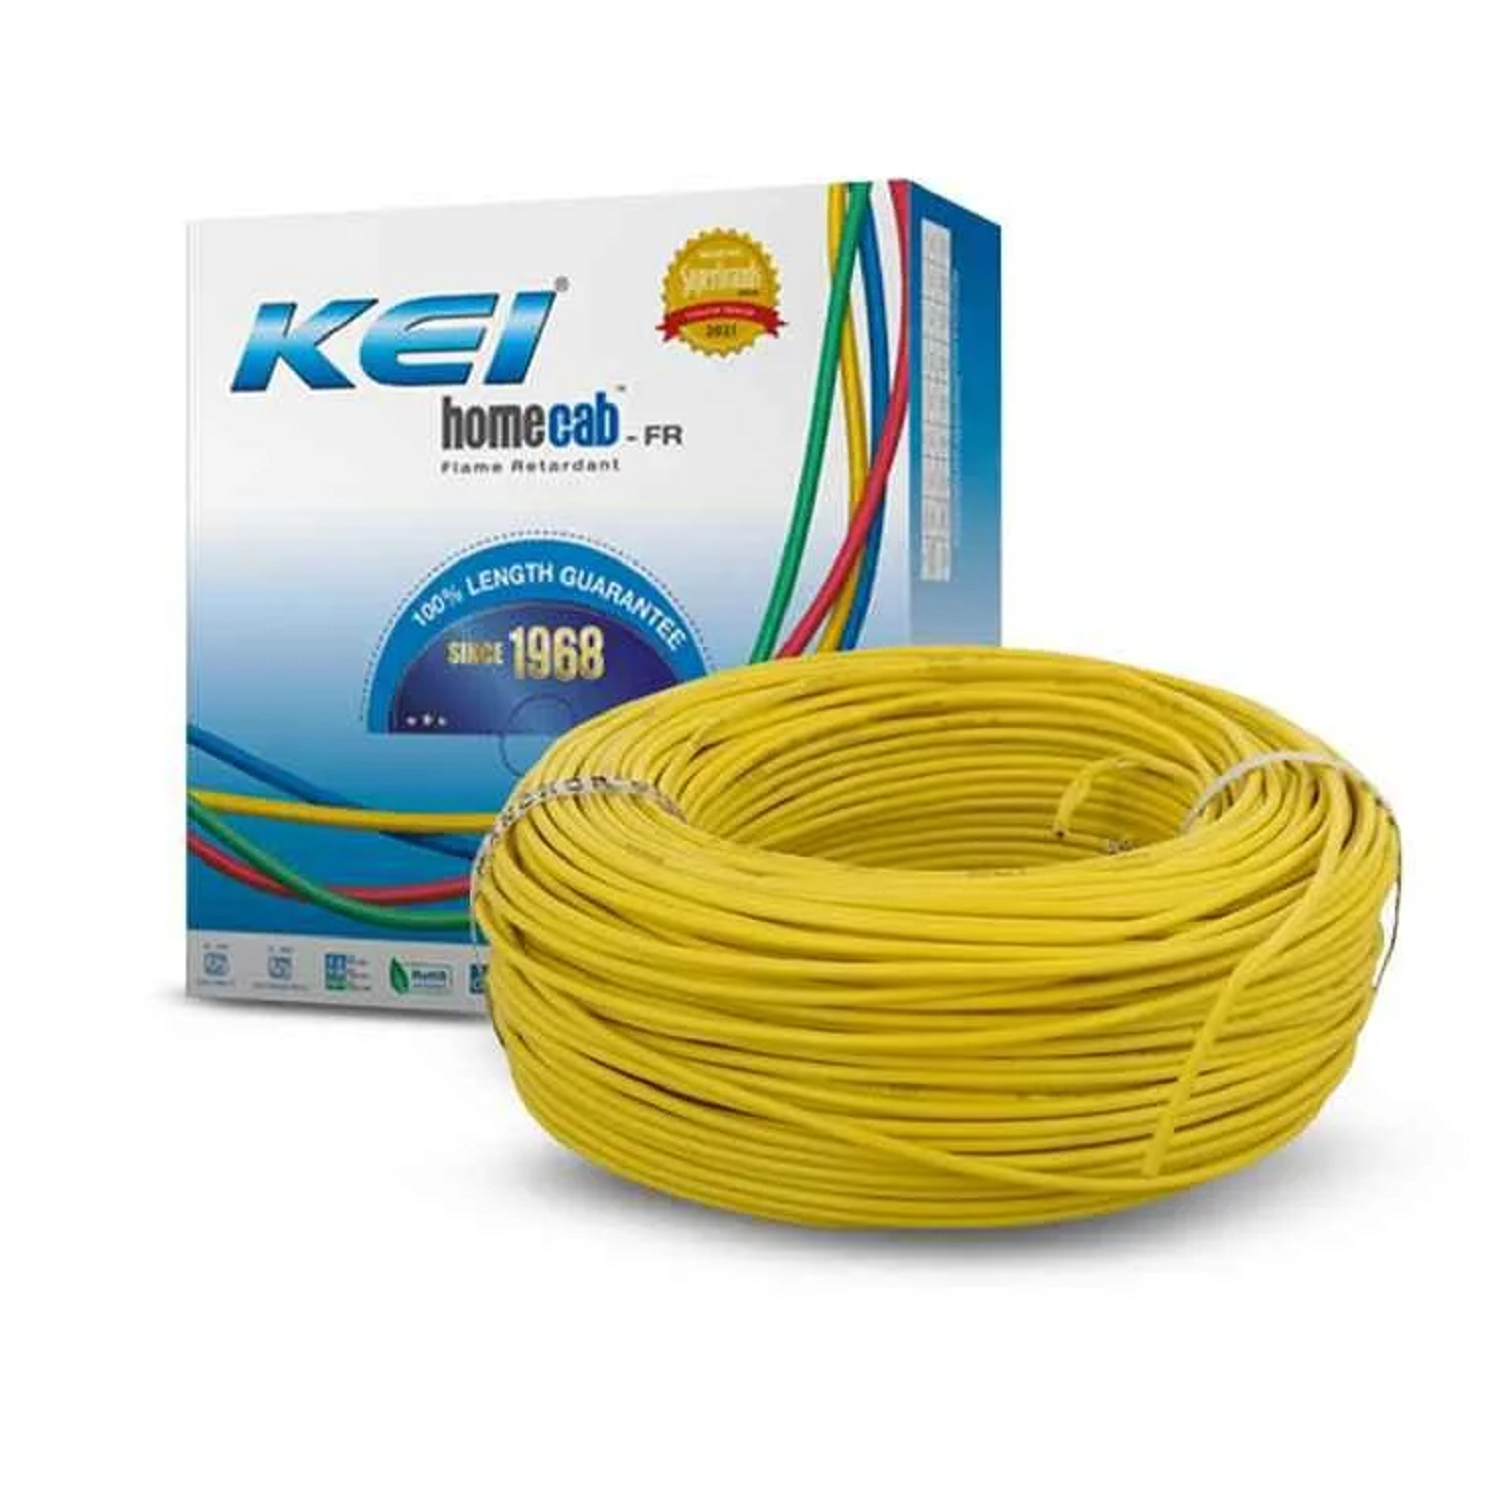 1.5 Sqmm KEI FR Single Core Copper Wire (90 Mtr) With PVC Insulated for House & Industrial Uses (Yel